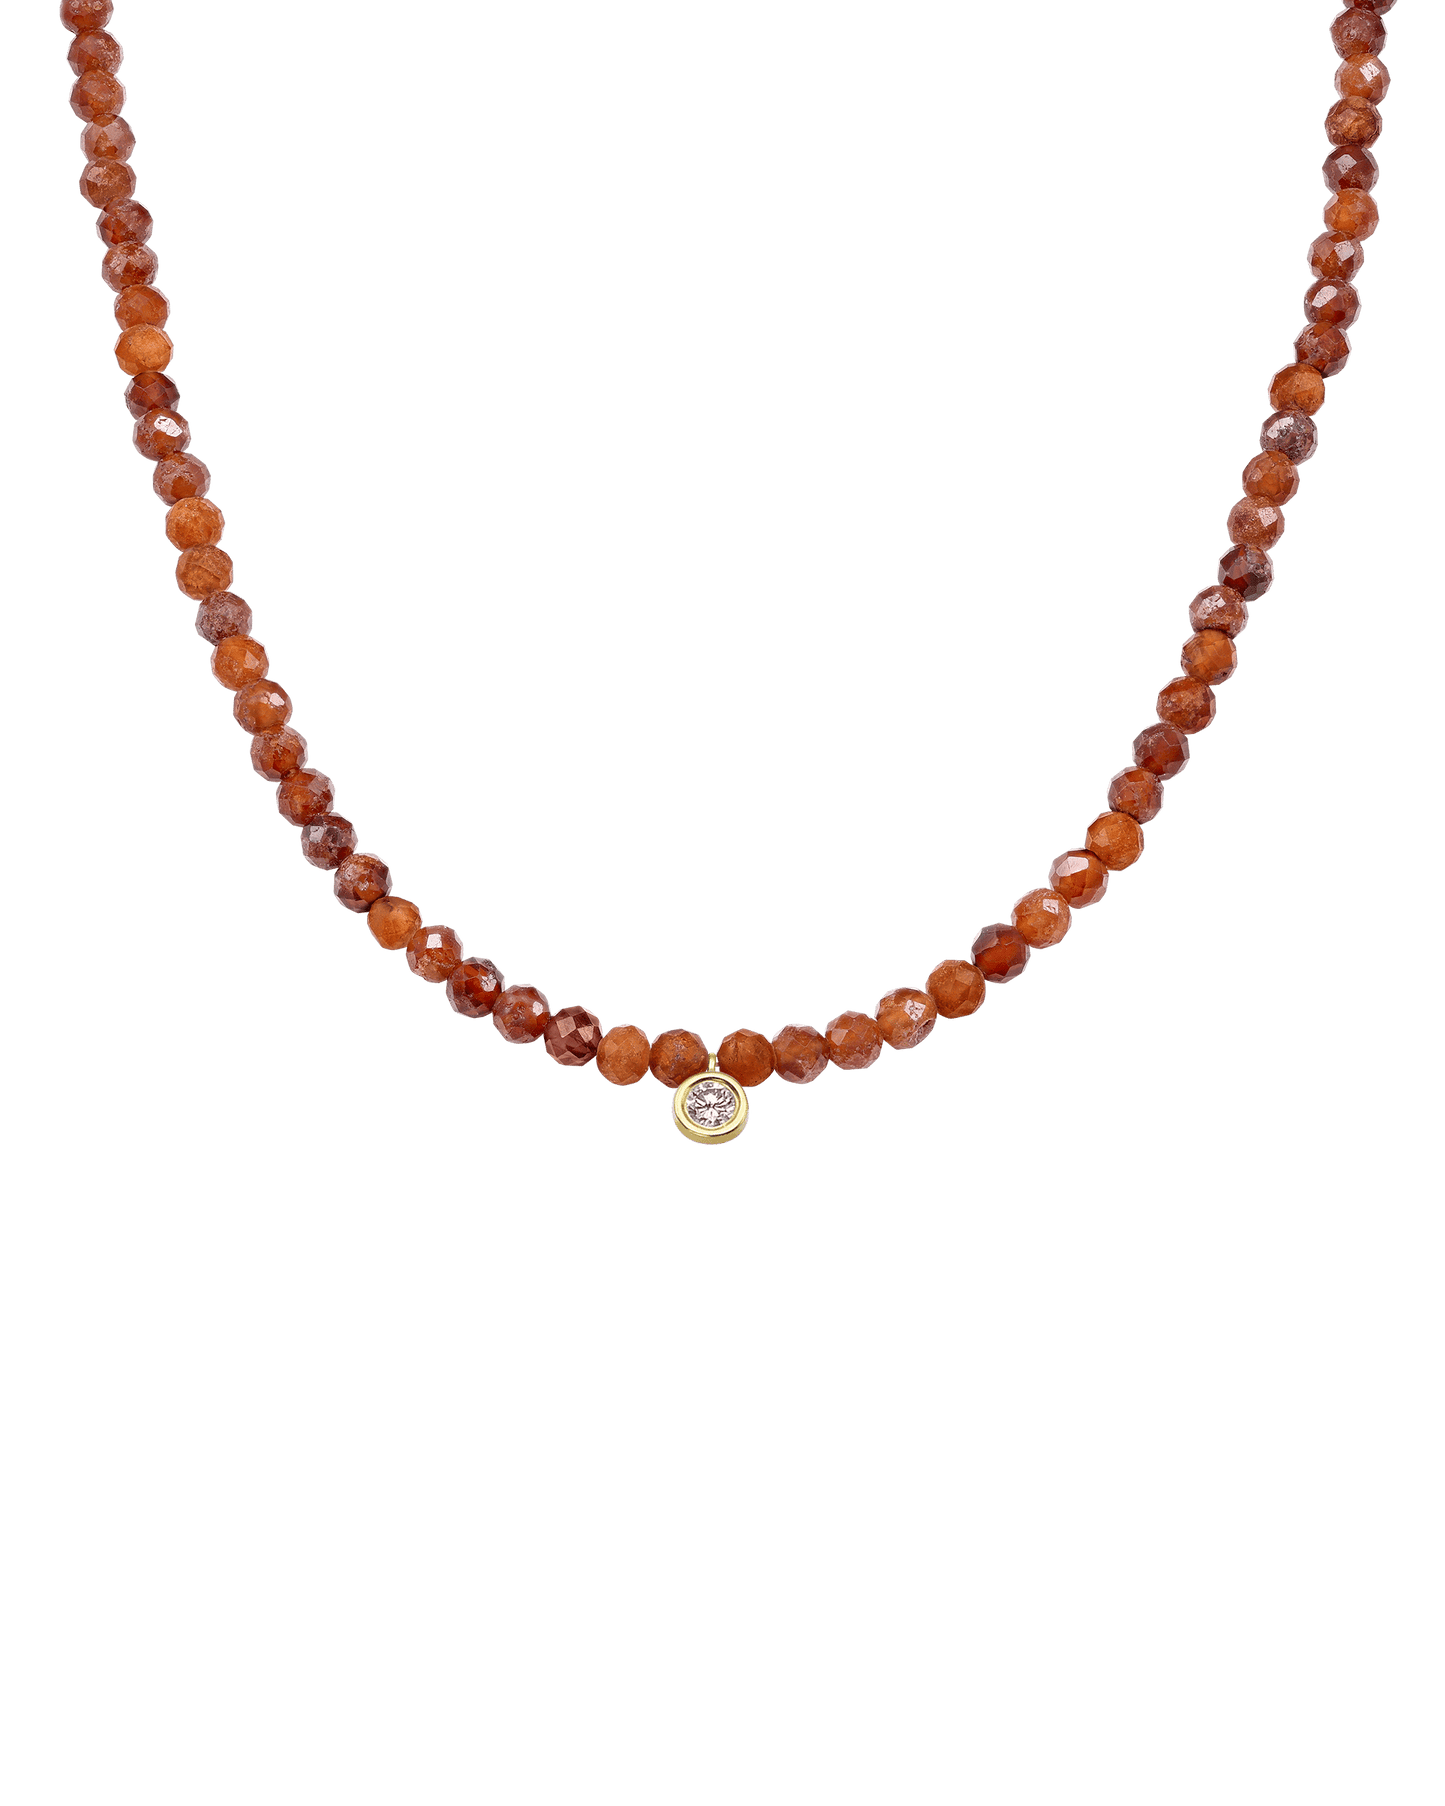 The Gemstone & Diamond Necklace - 14K Yellow Gold Necklaces 14K Solid Gold Natural Garnet Large: 0.1ct 14"